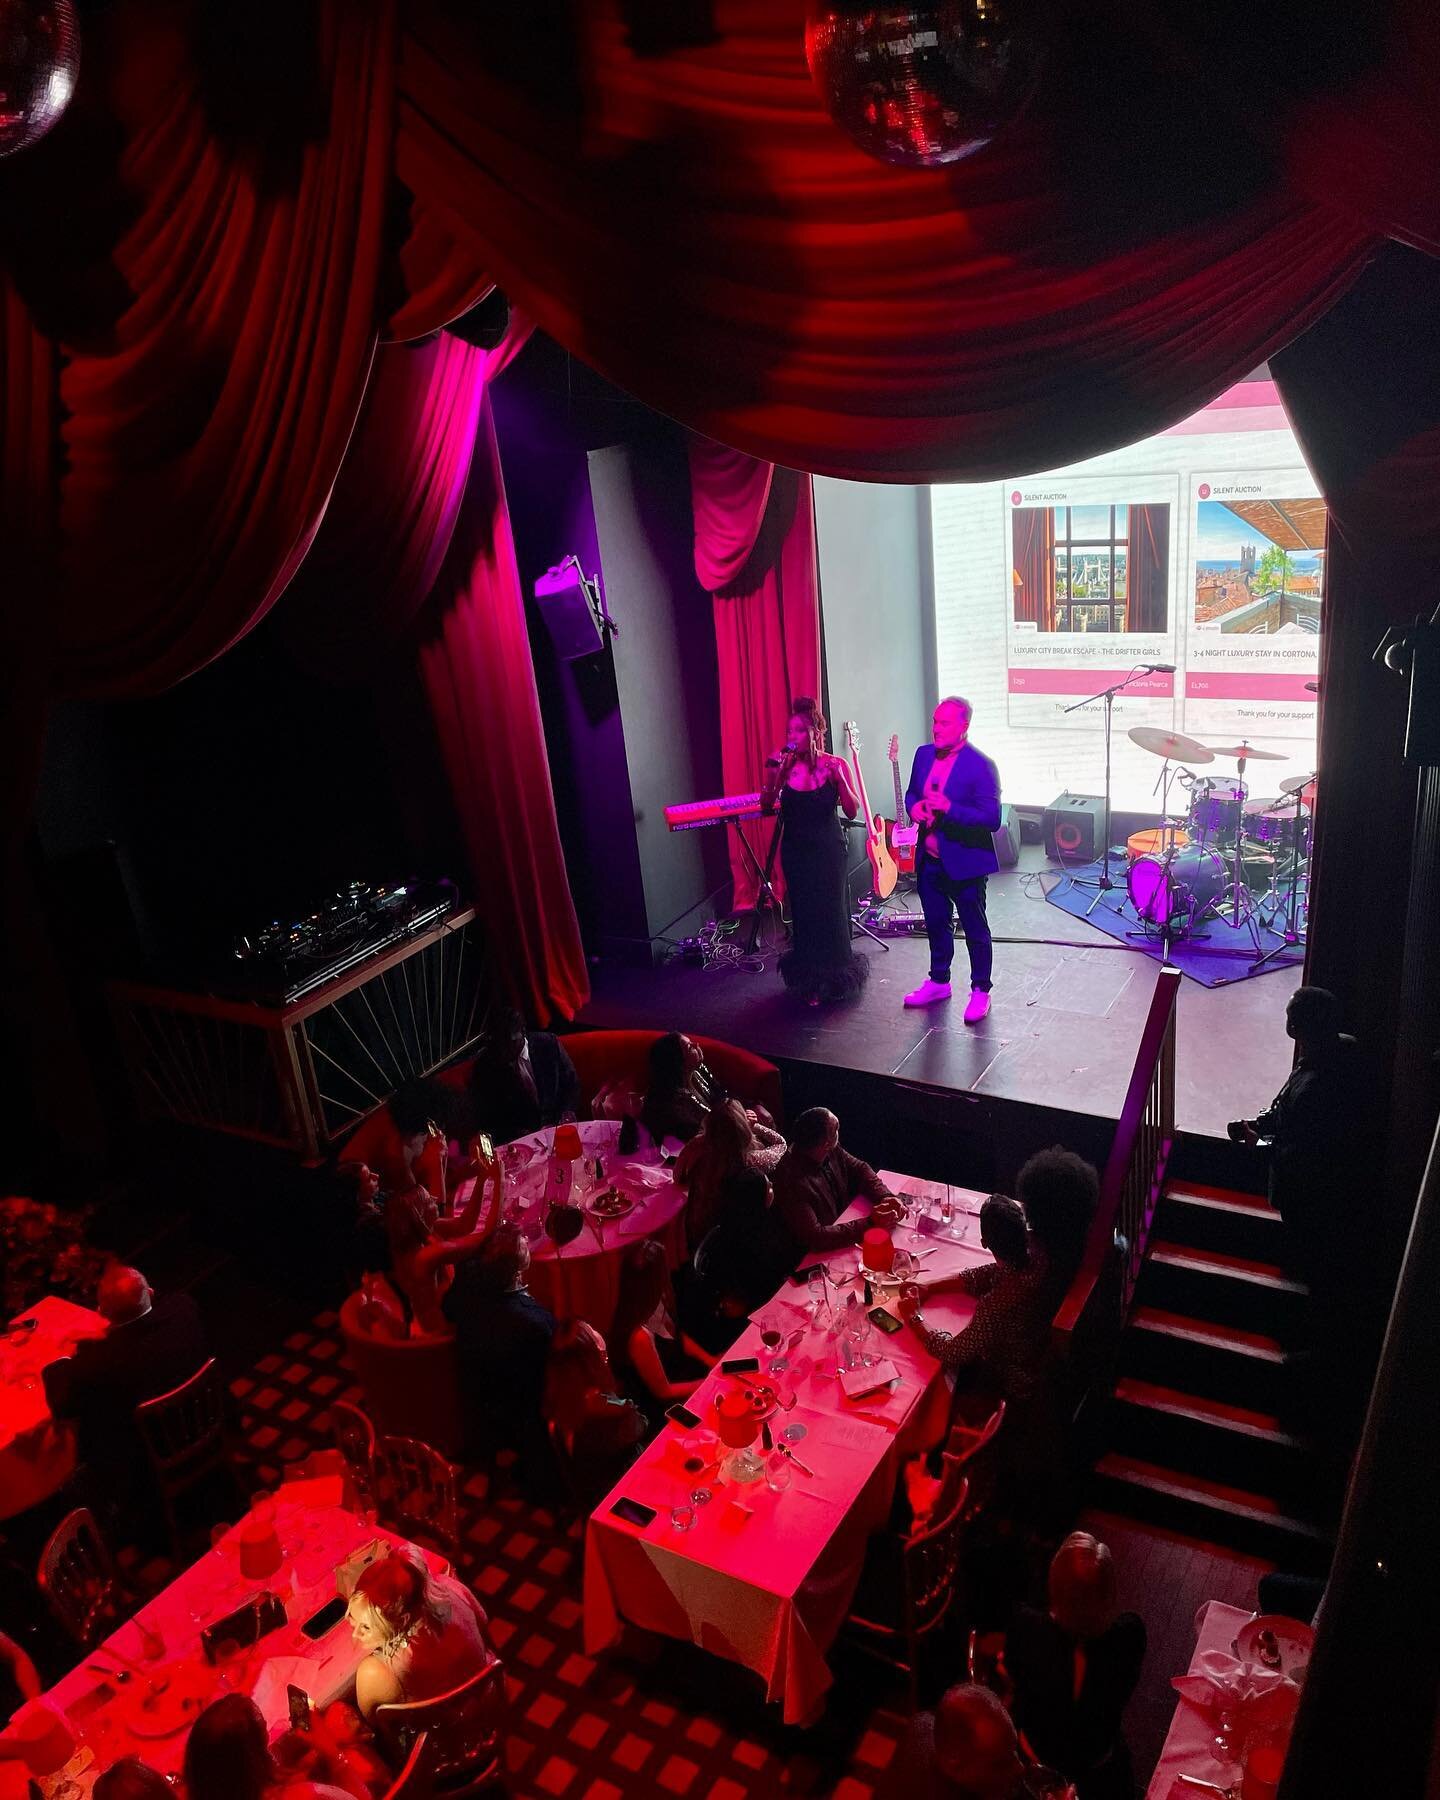 🌸 The Spring Ball 2022 in 📸

@alexandraburke and @nickede hosted a fabulous event at the @windmillsoho to raise funds for @styleforstroke and @melissabellfoundation

Various performers took to the stage to entertain the audience, as they generously